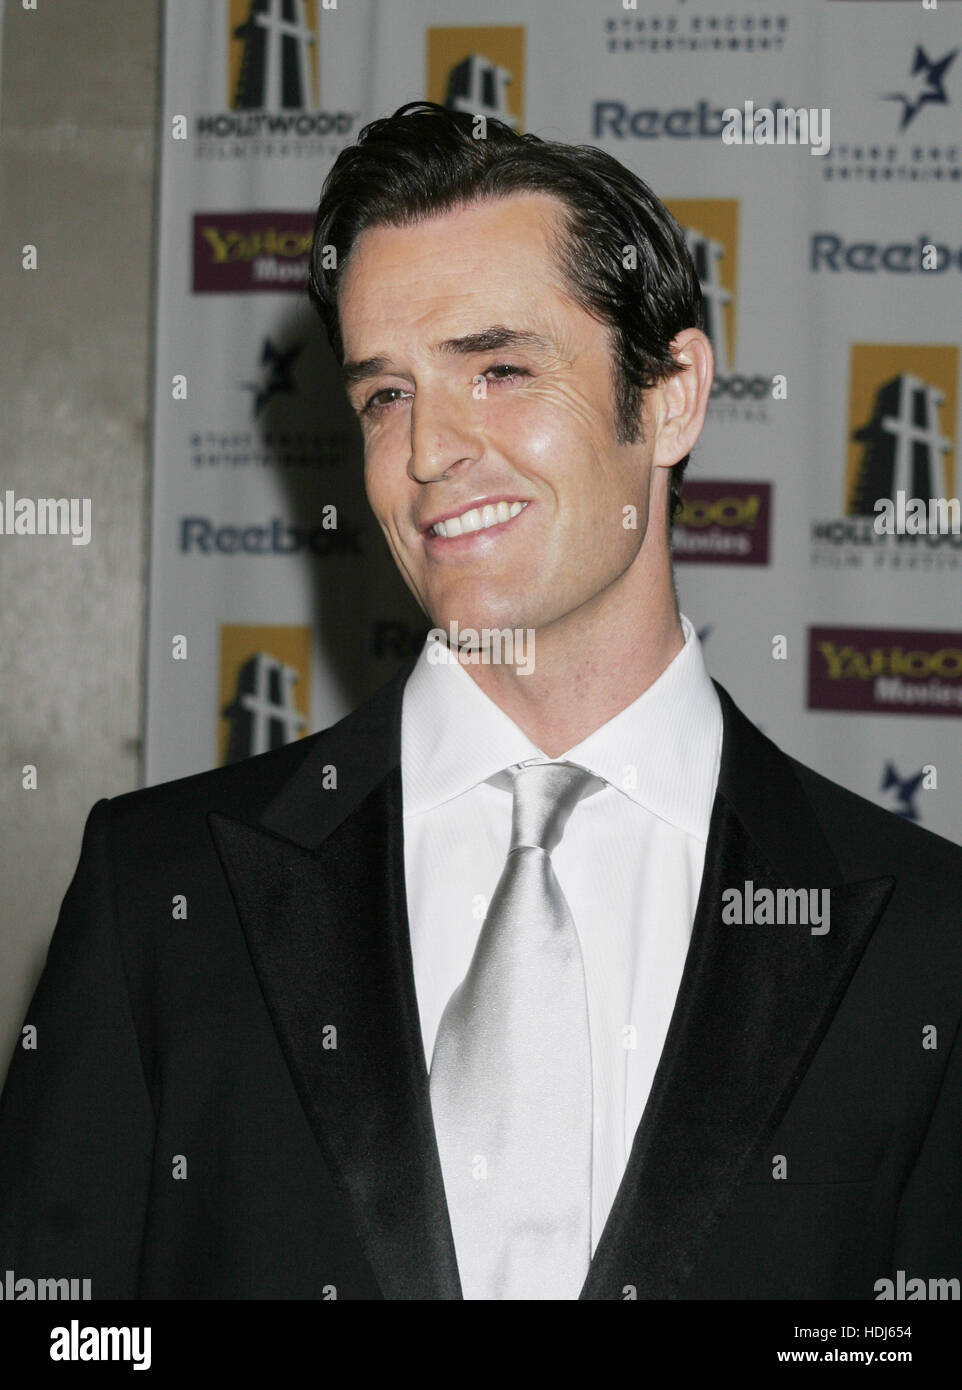 Rupert Everett at the 8th Annual Hollywood Film Festival Hollywood Awards Gala Ceremony on October 18, 2004 in Beverly Hills, California. Photo credit: Francis Specker Stock Photo